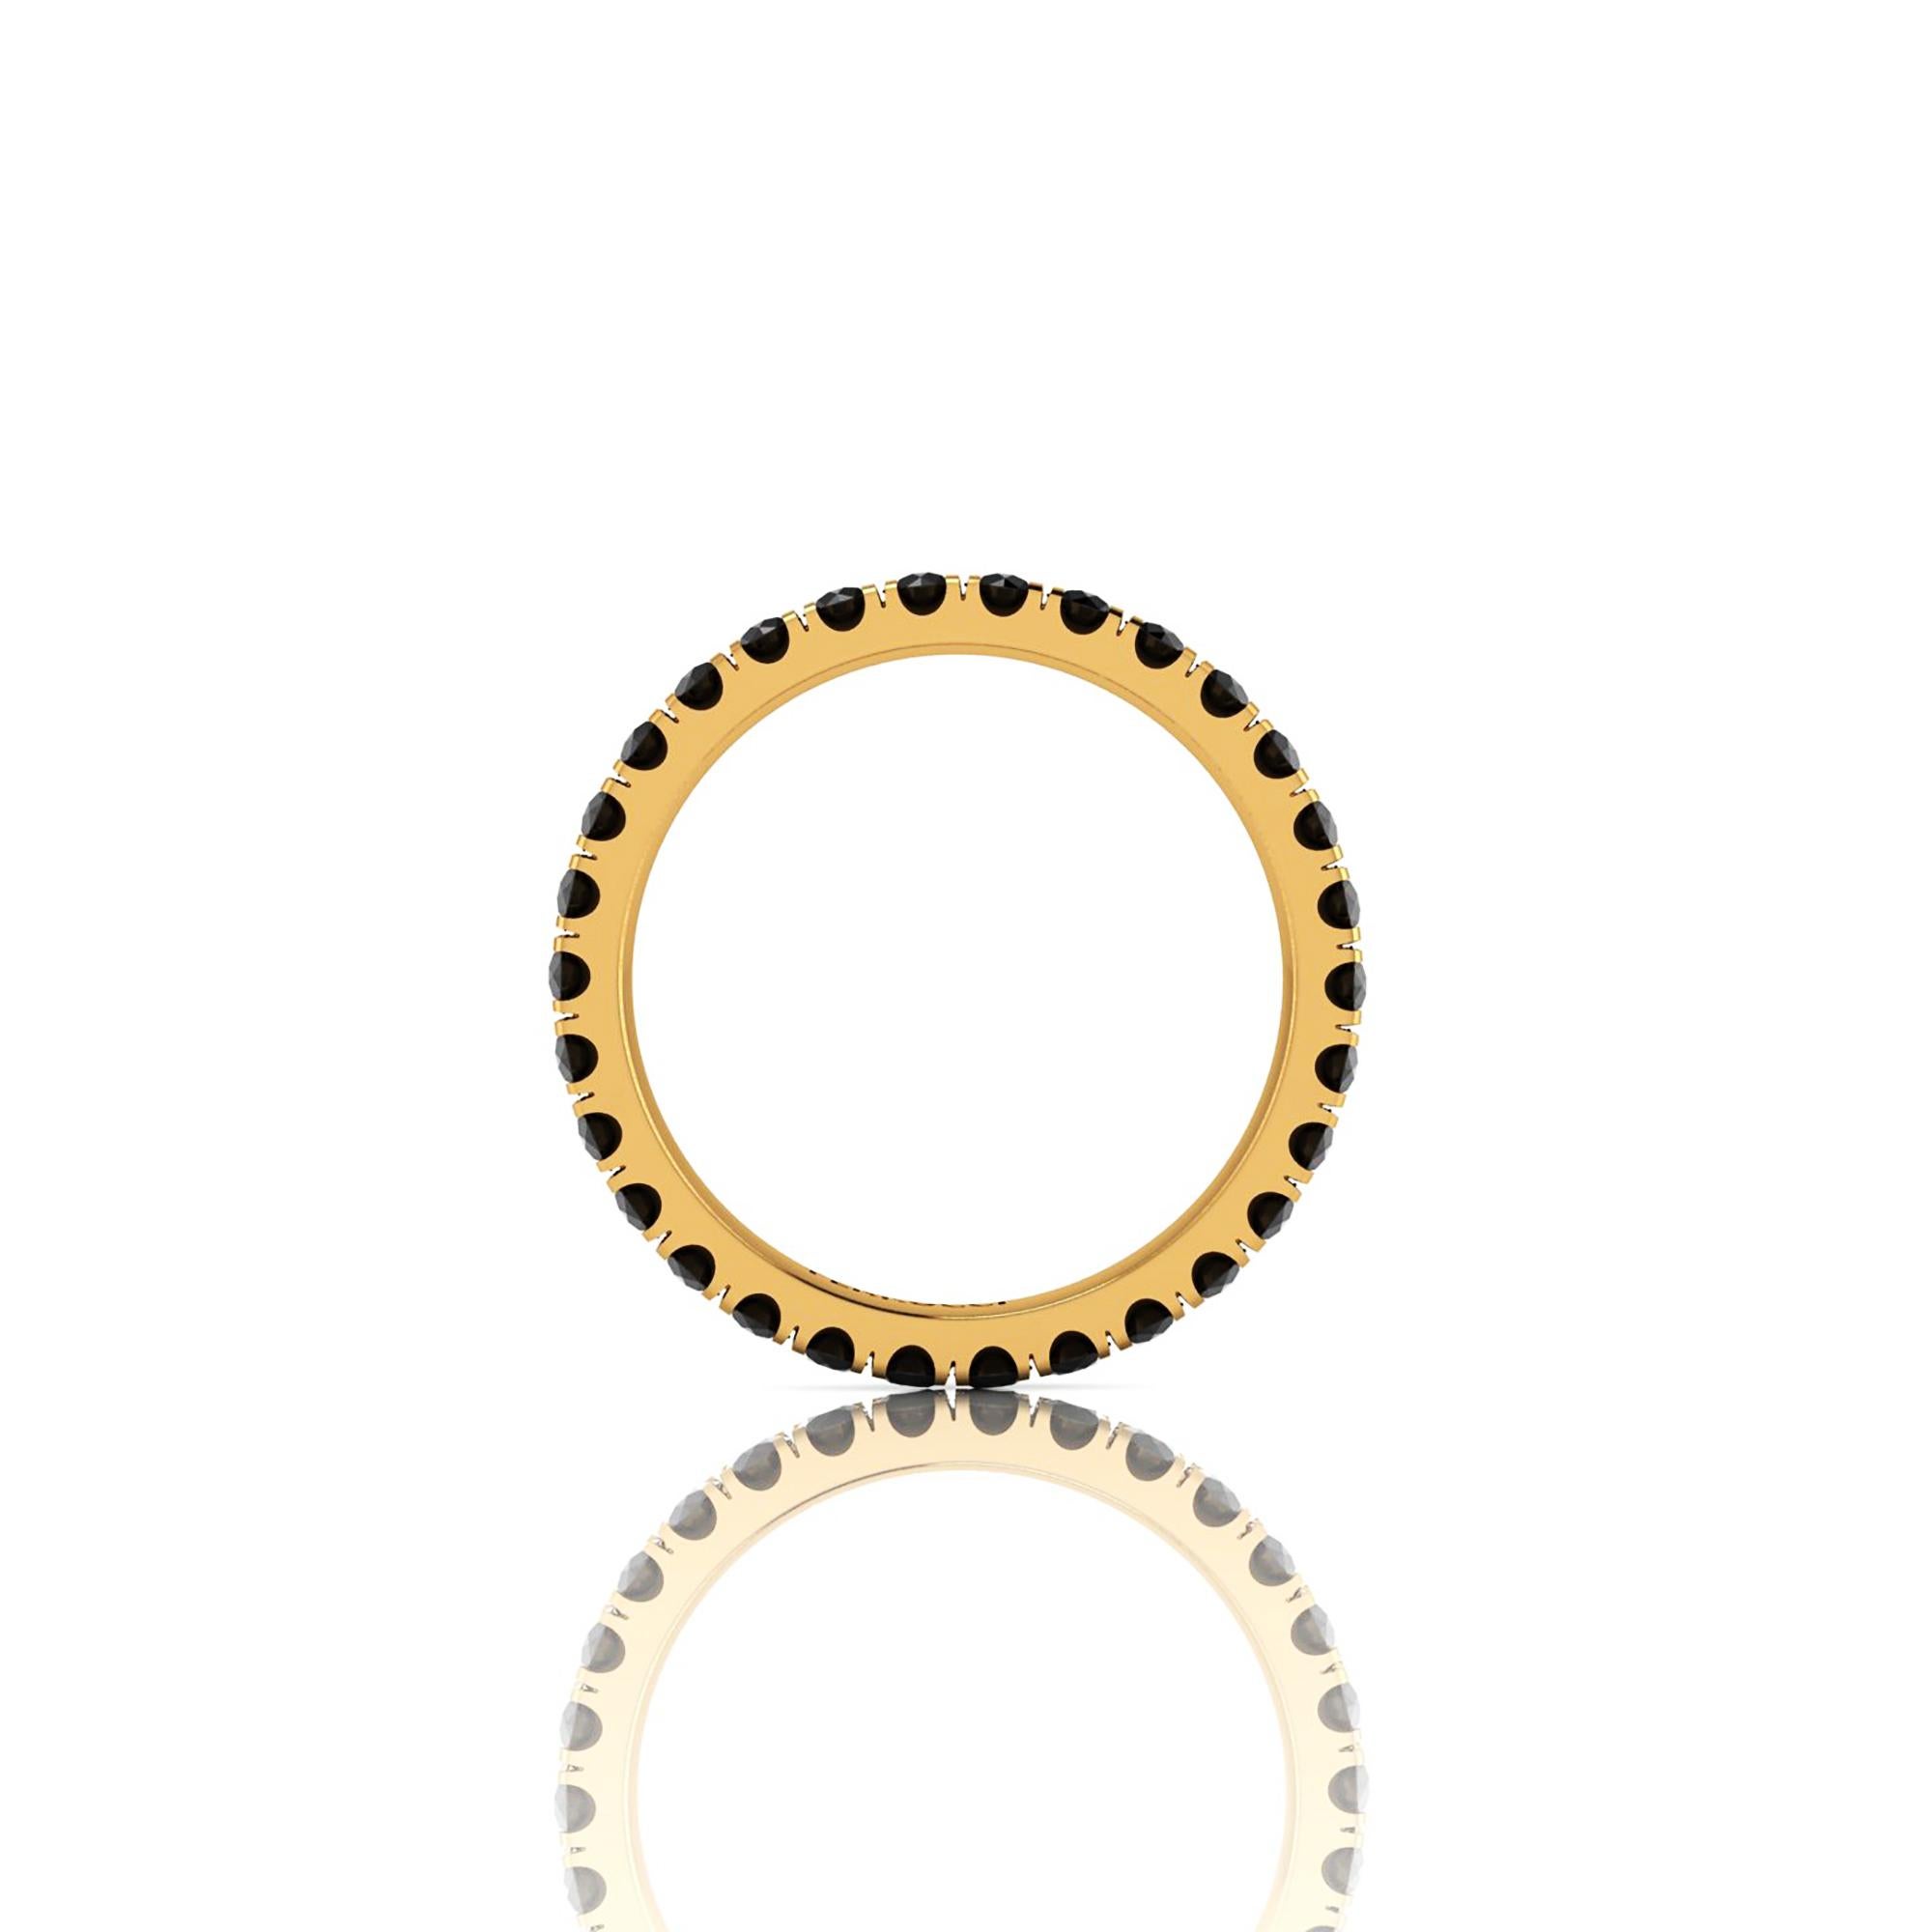 A classic beauty never ending, 1 carat of black diamonds set to perfection in a hand crafted, stackable 18k yellow gold eternity band, 2.3 mm wide, stackable collection, made in New York with the best Italian craftsmanship, size 6, complimentary